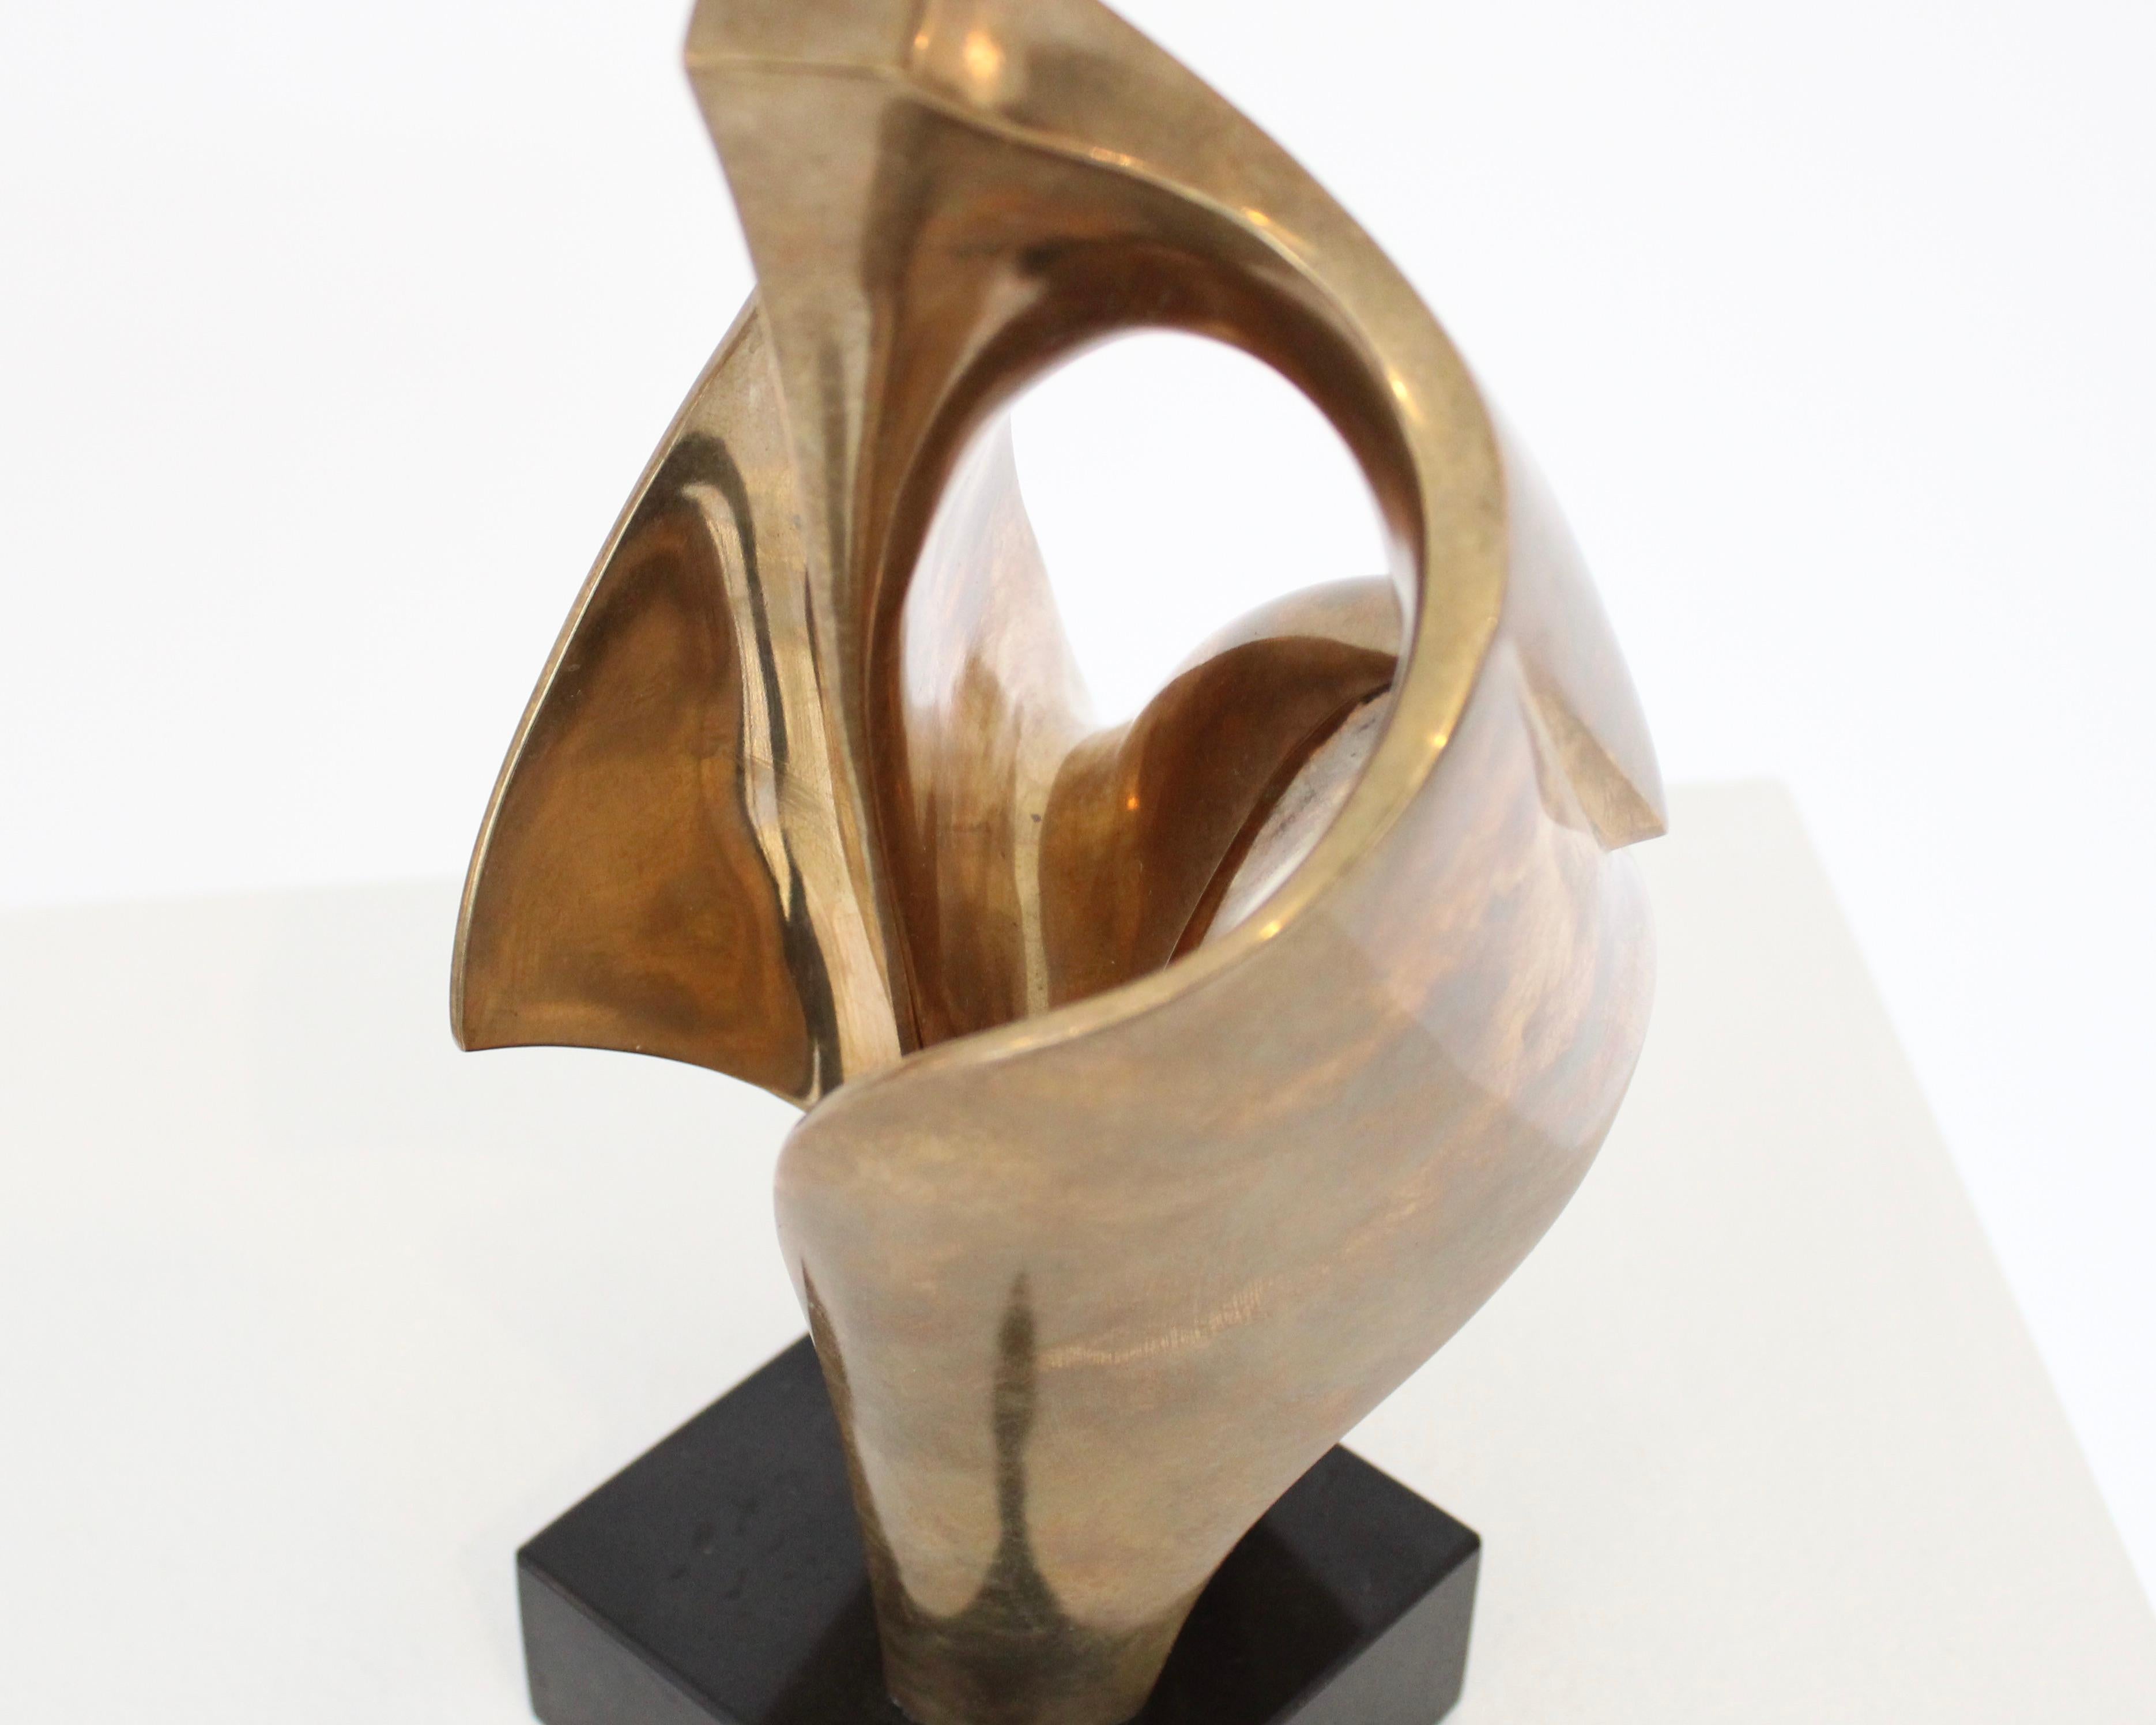 Abstract Bronze Sculpture Attributed to Artist Alicia Penalba  1